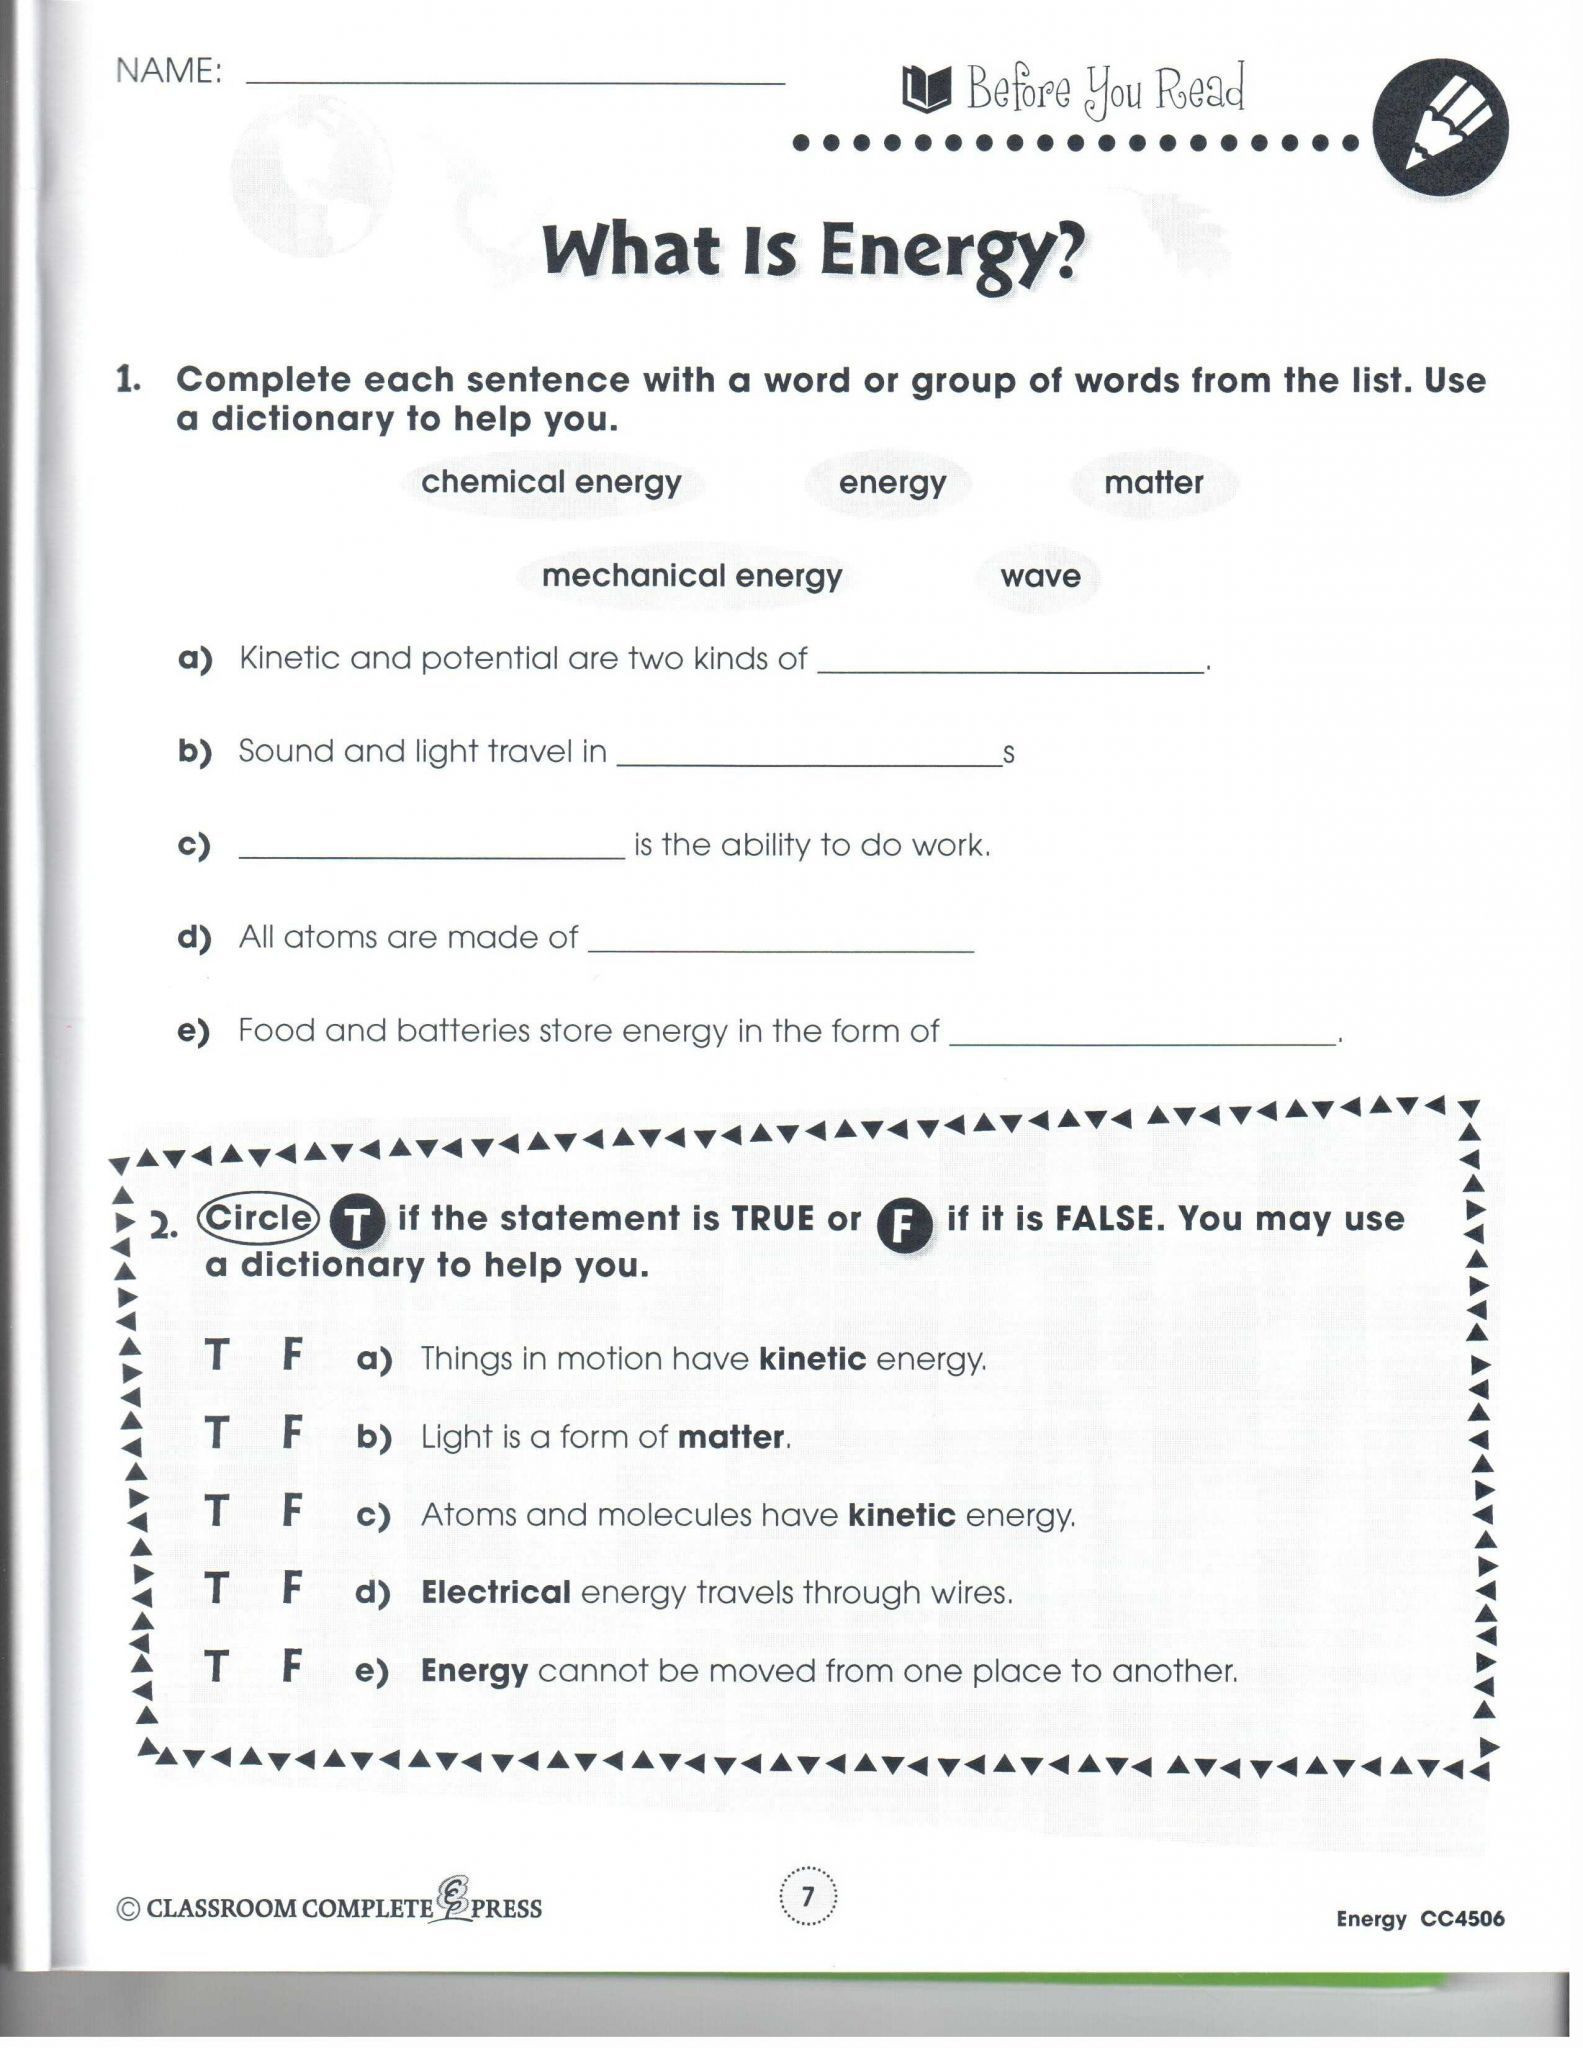 Potential and Kinetic Energy Worksheet Pin On Finance Bud